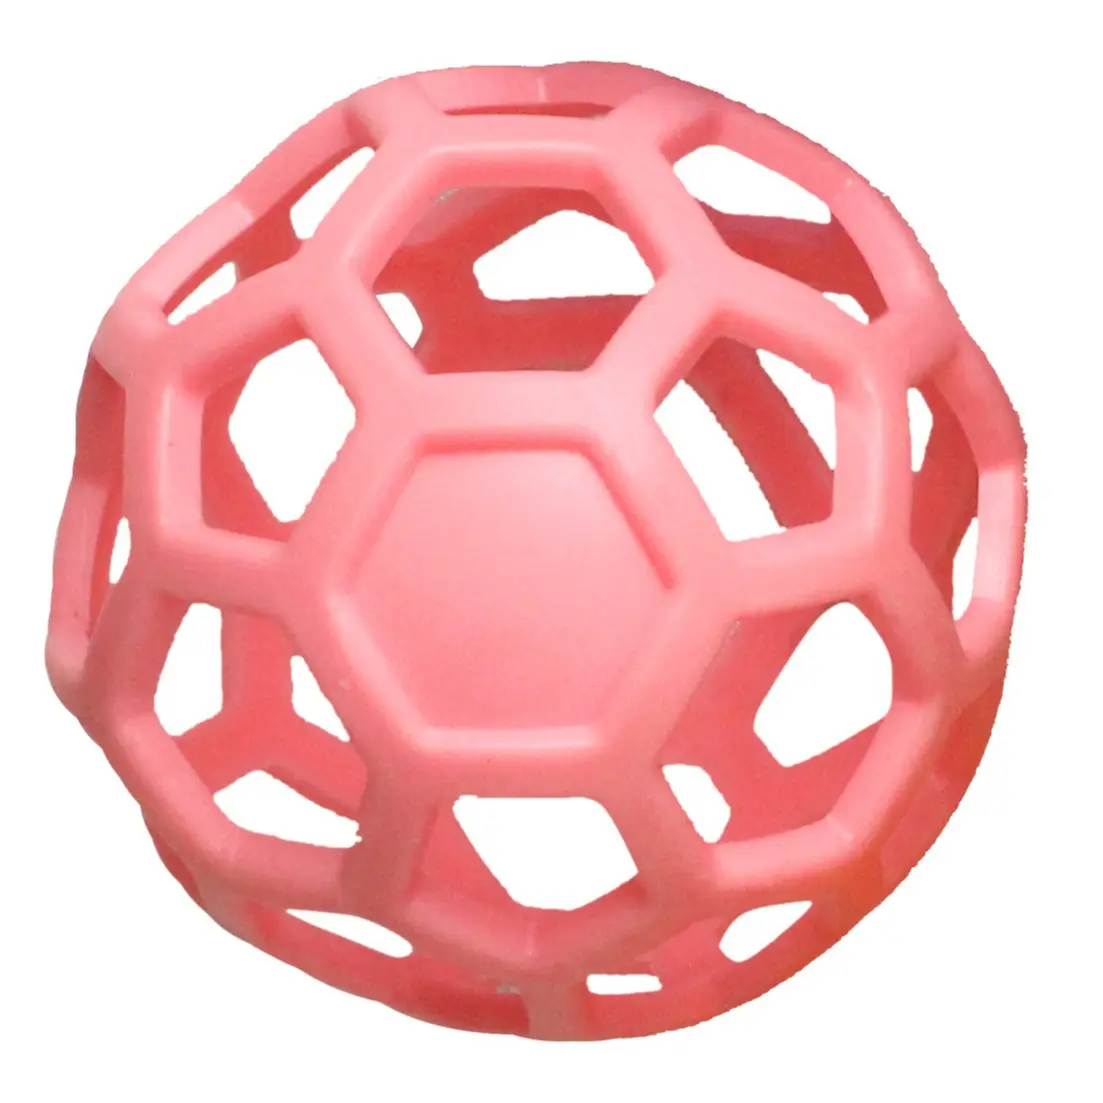 Distributeur de friandises pour chien Puzzle Ball Pet Interactive Toy Funny Puppy Tennis Rubber Training Ultra Squeaky Dog Chew Balls